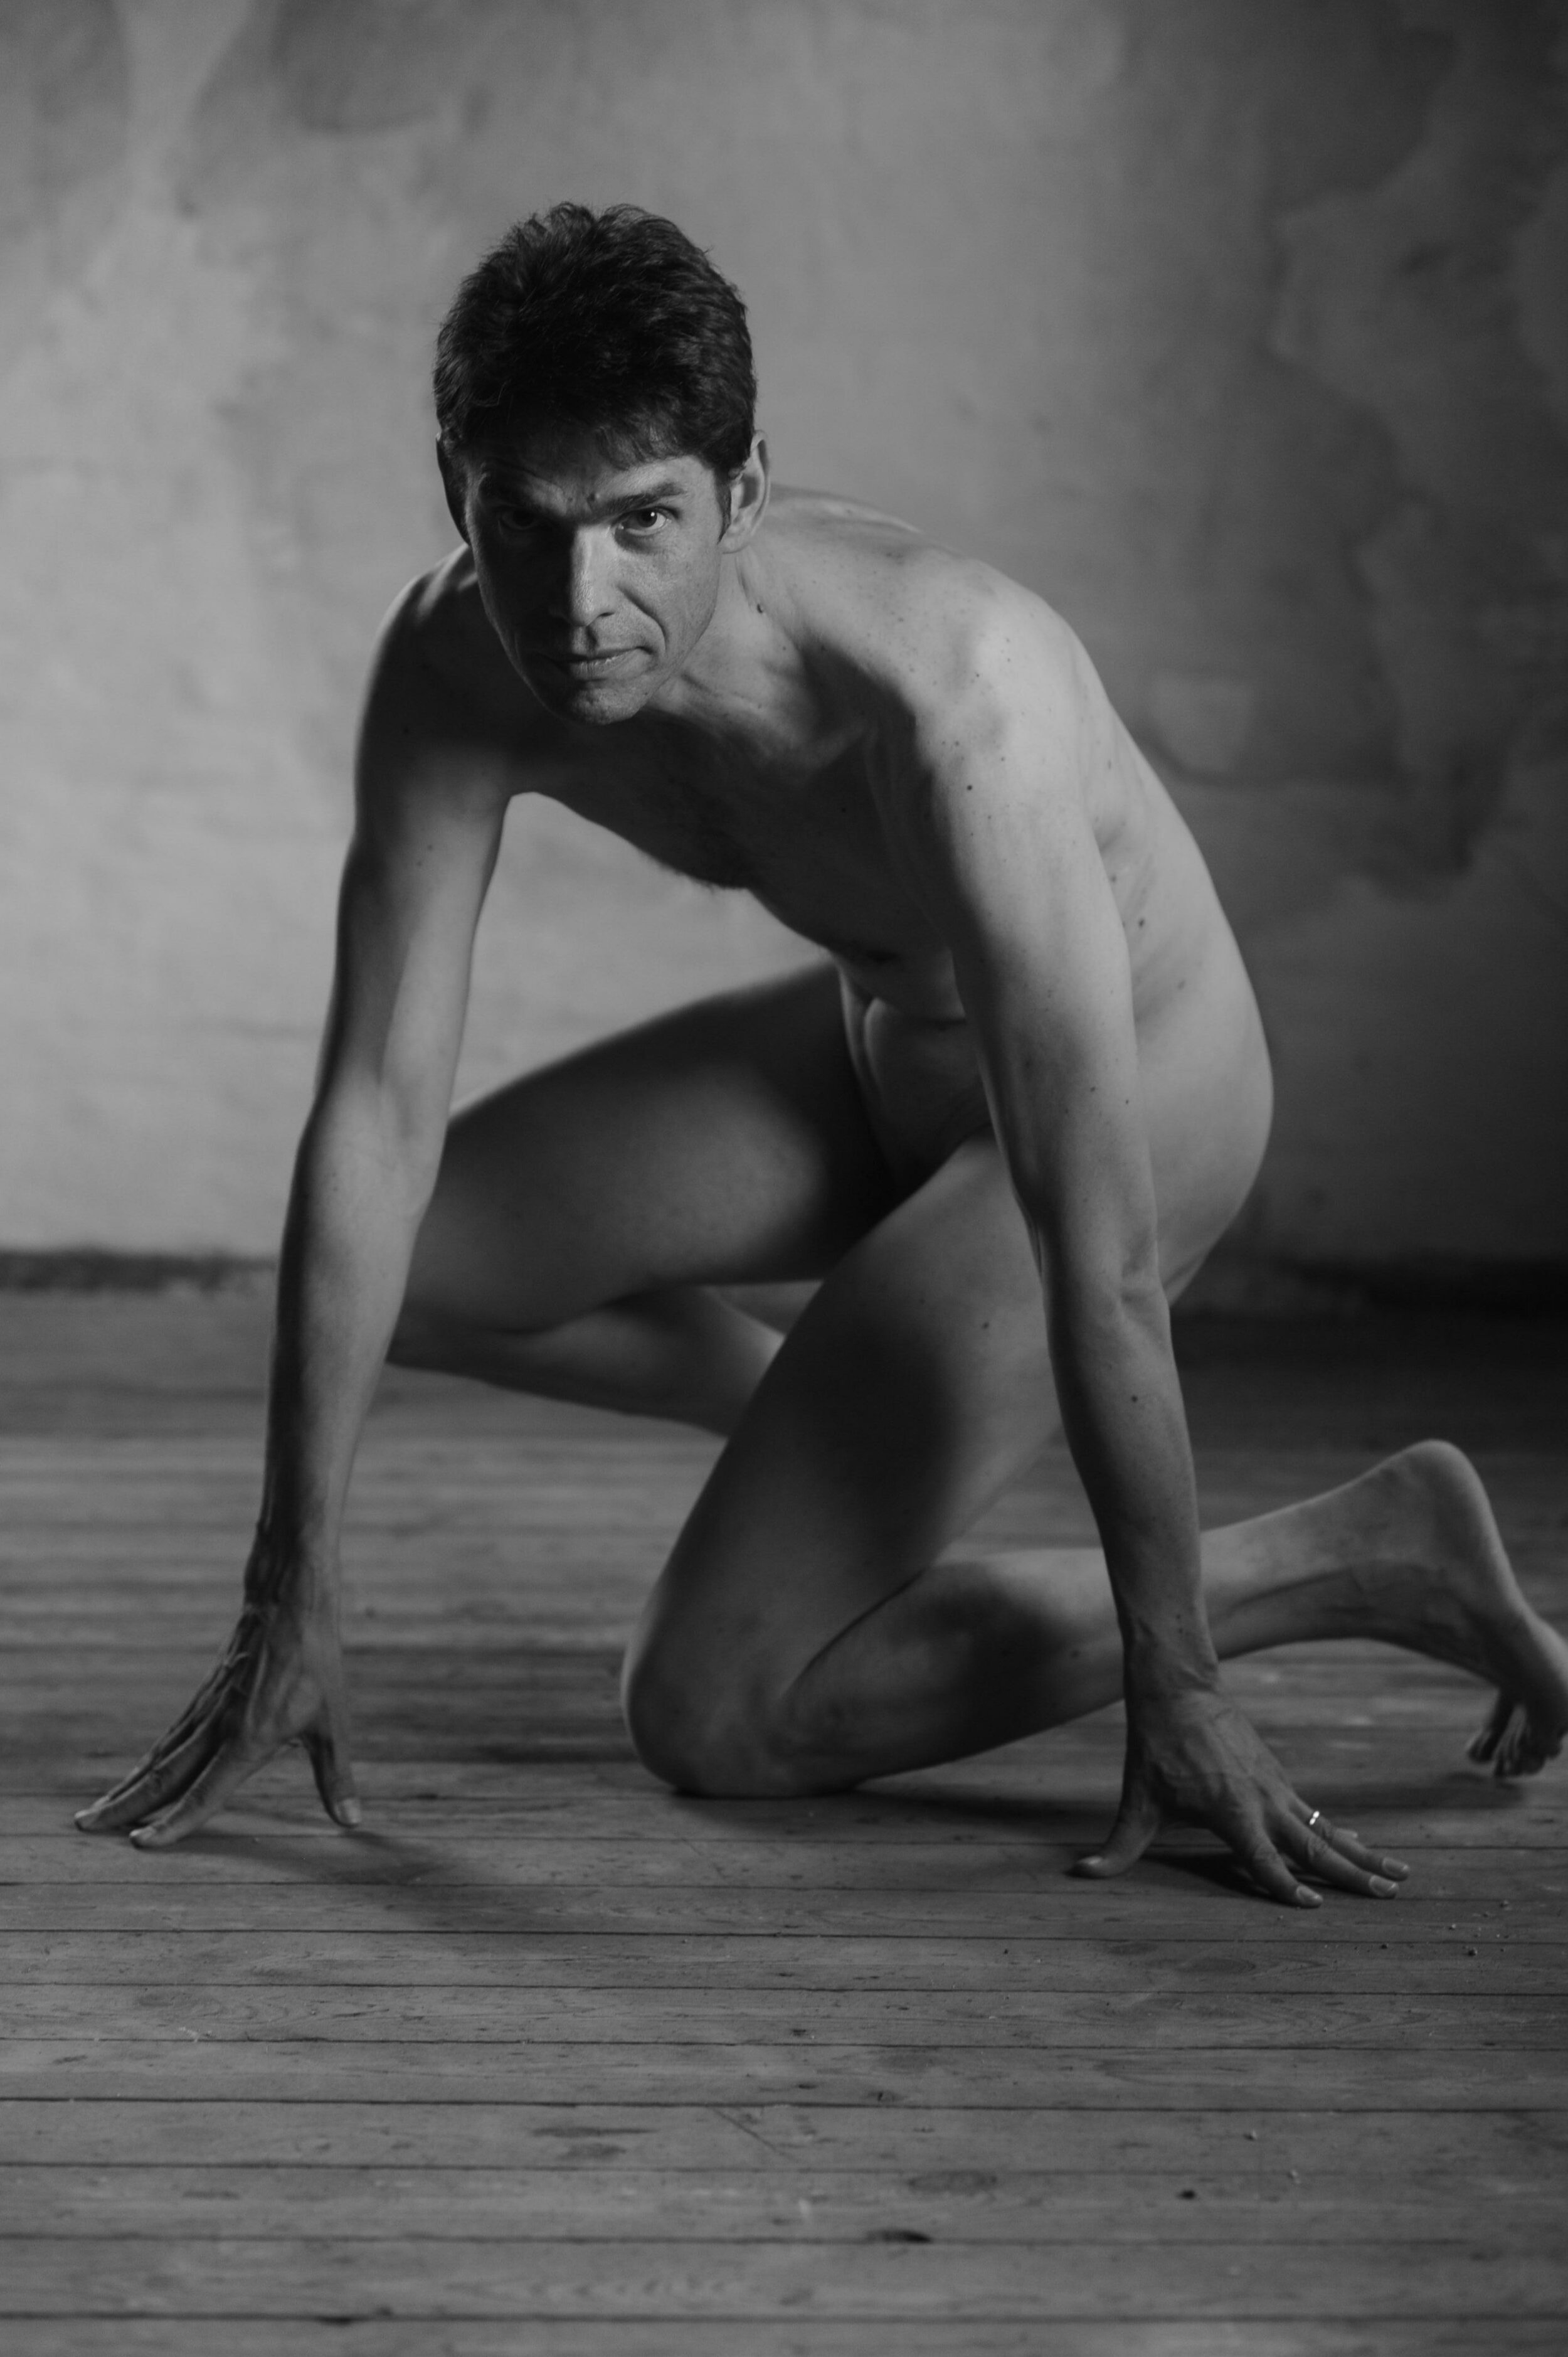 Exquisite masculinity: Indulge in the beauty of vintage male nudes